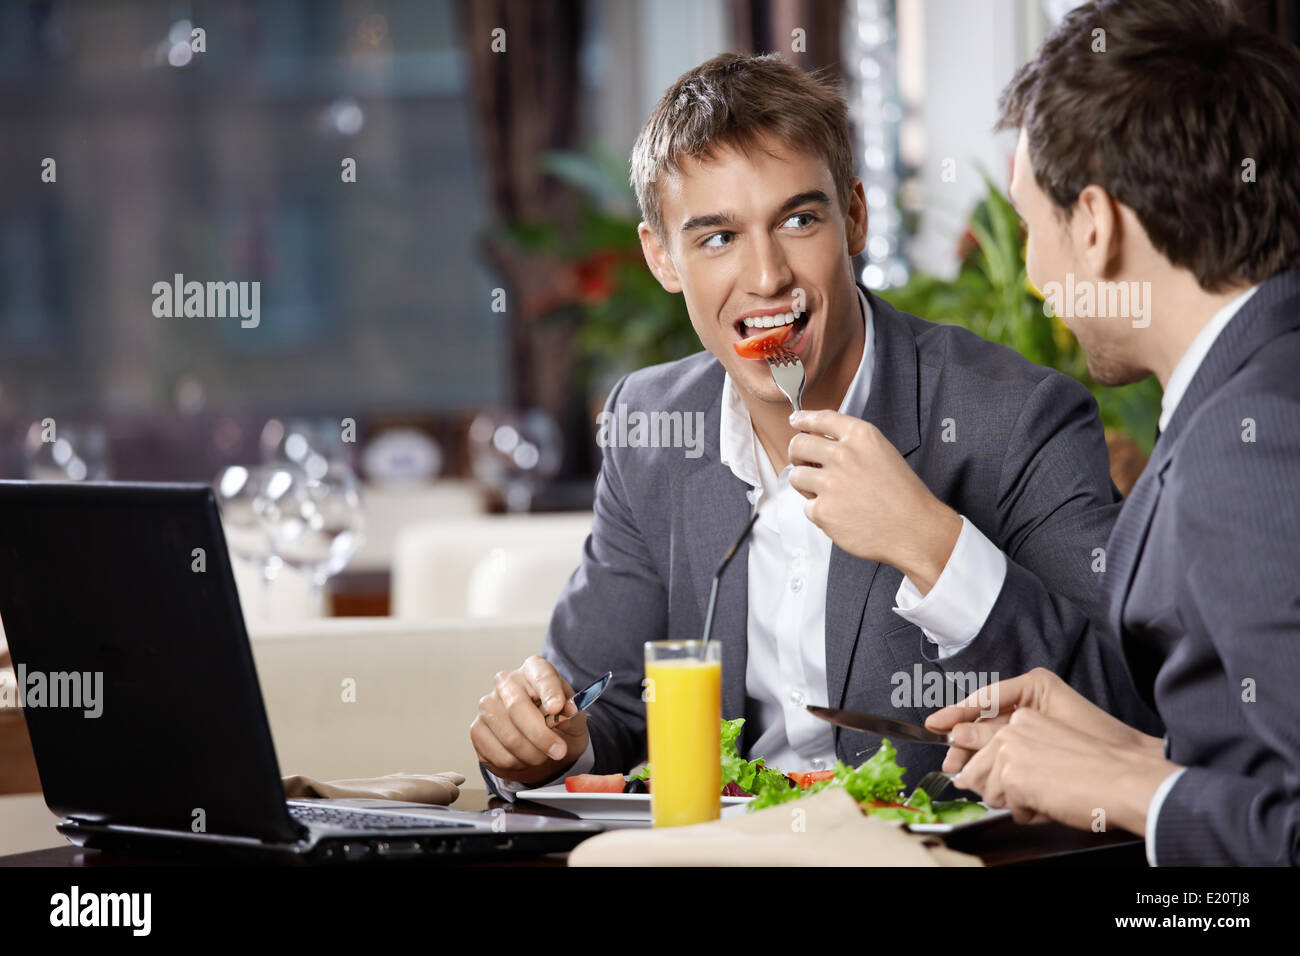 Two smiling business men eat at restaurant Stock Photo